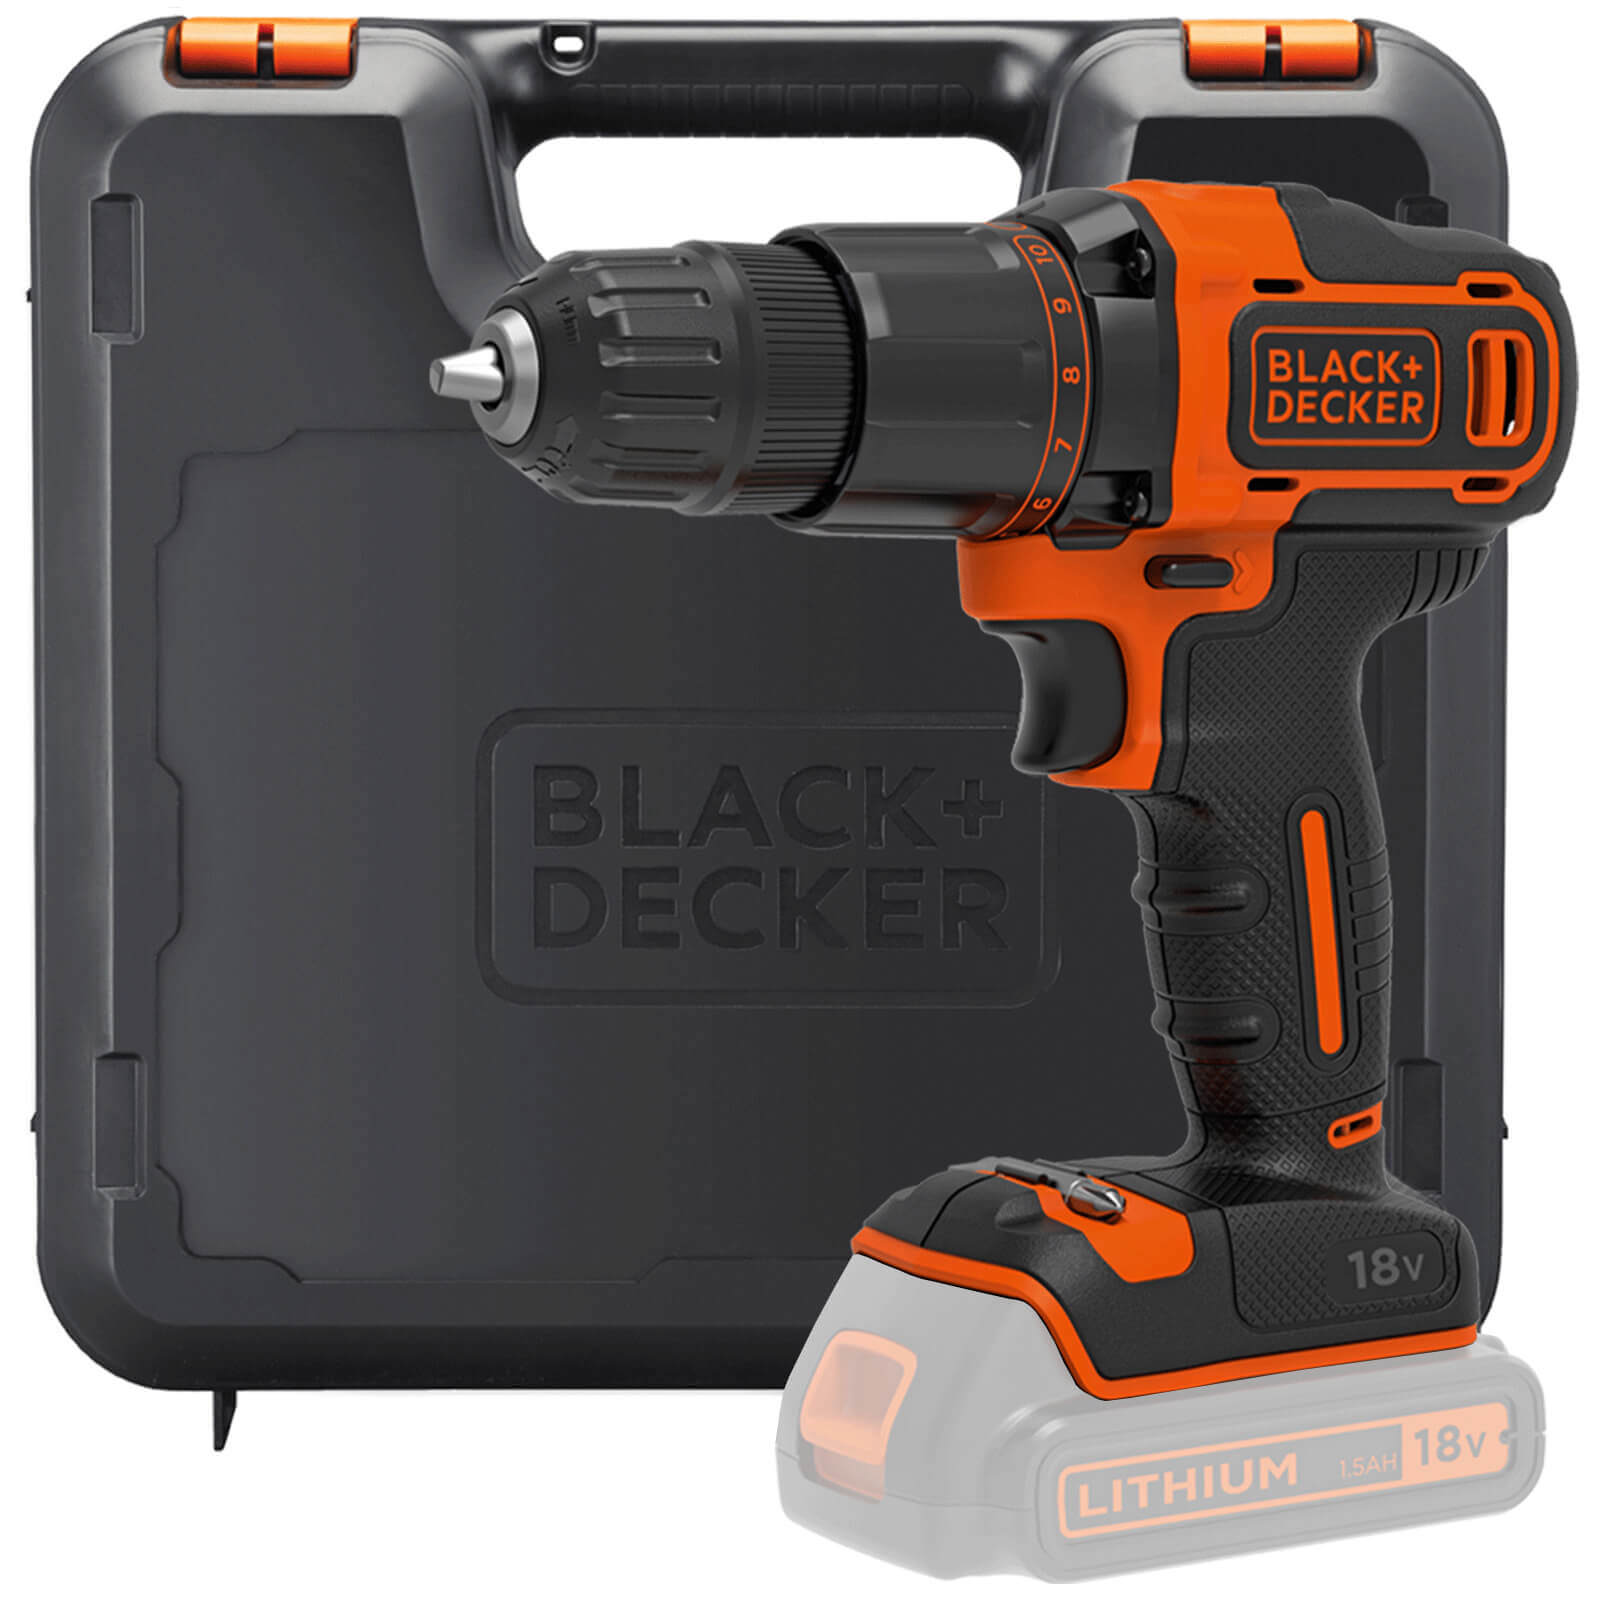 Image of Black and Decker BCD700S 18v Cordless Combi Drill No Batteries No Charger Case